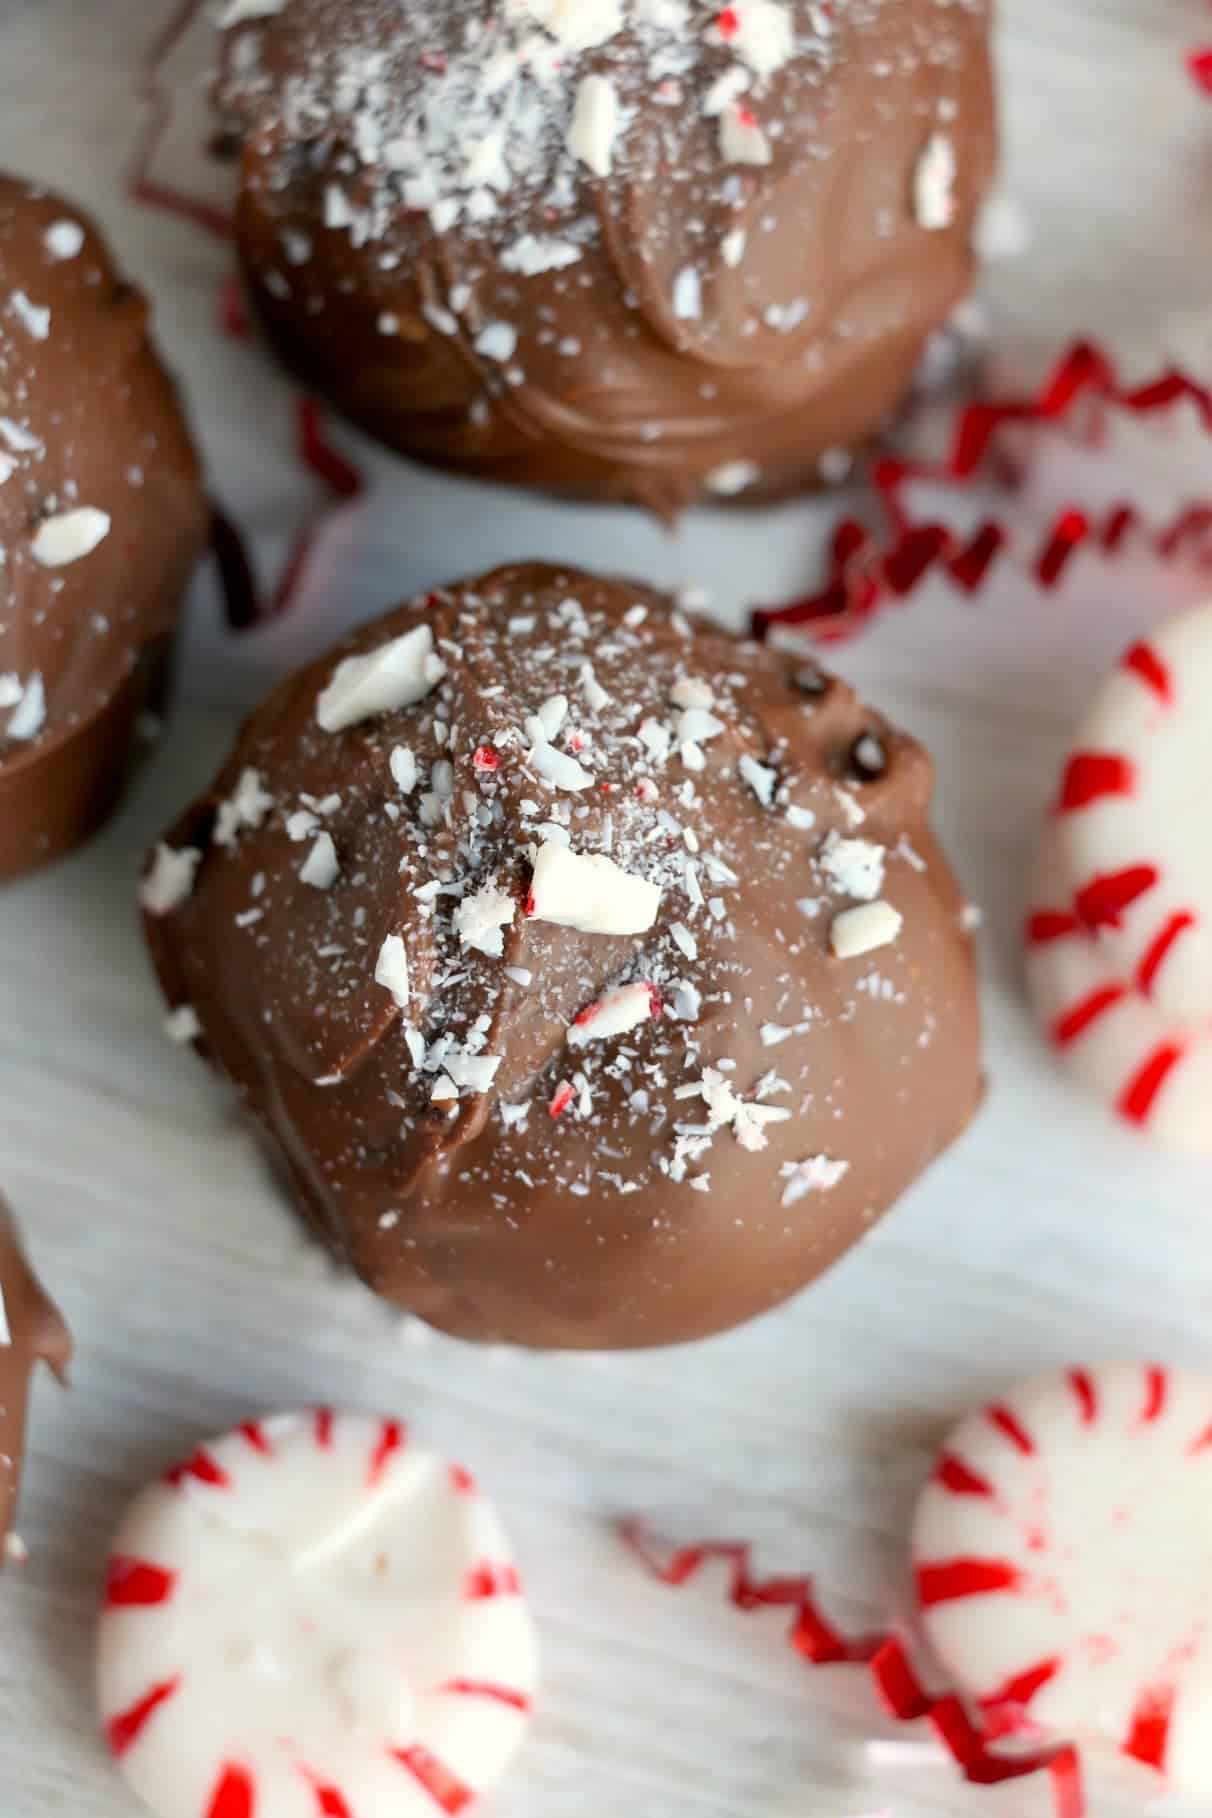 Chocolate-covered cake ball with crushed peppermints on top.